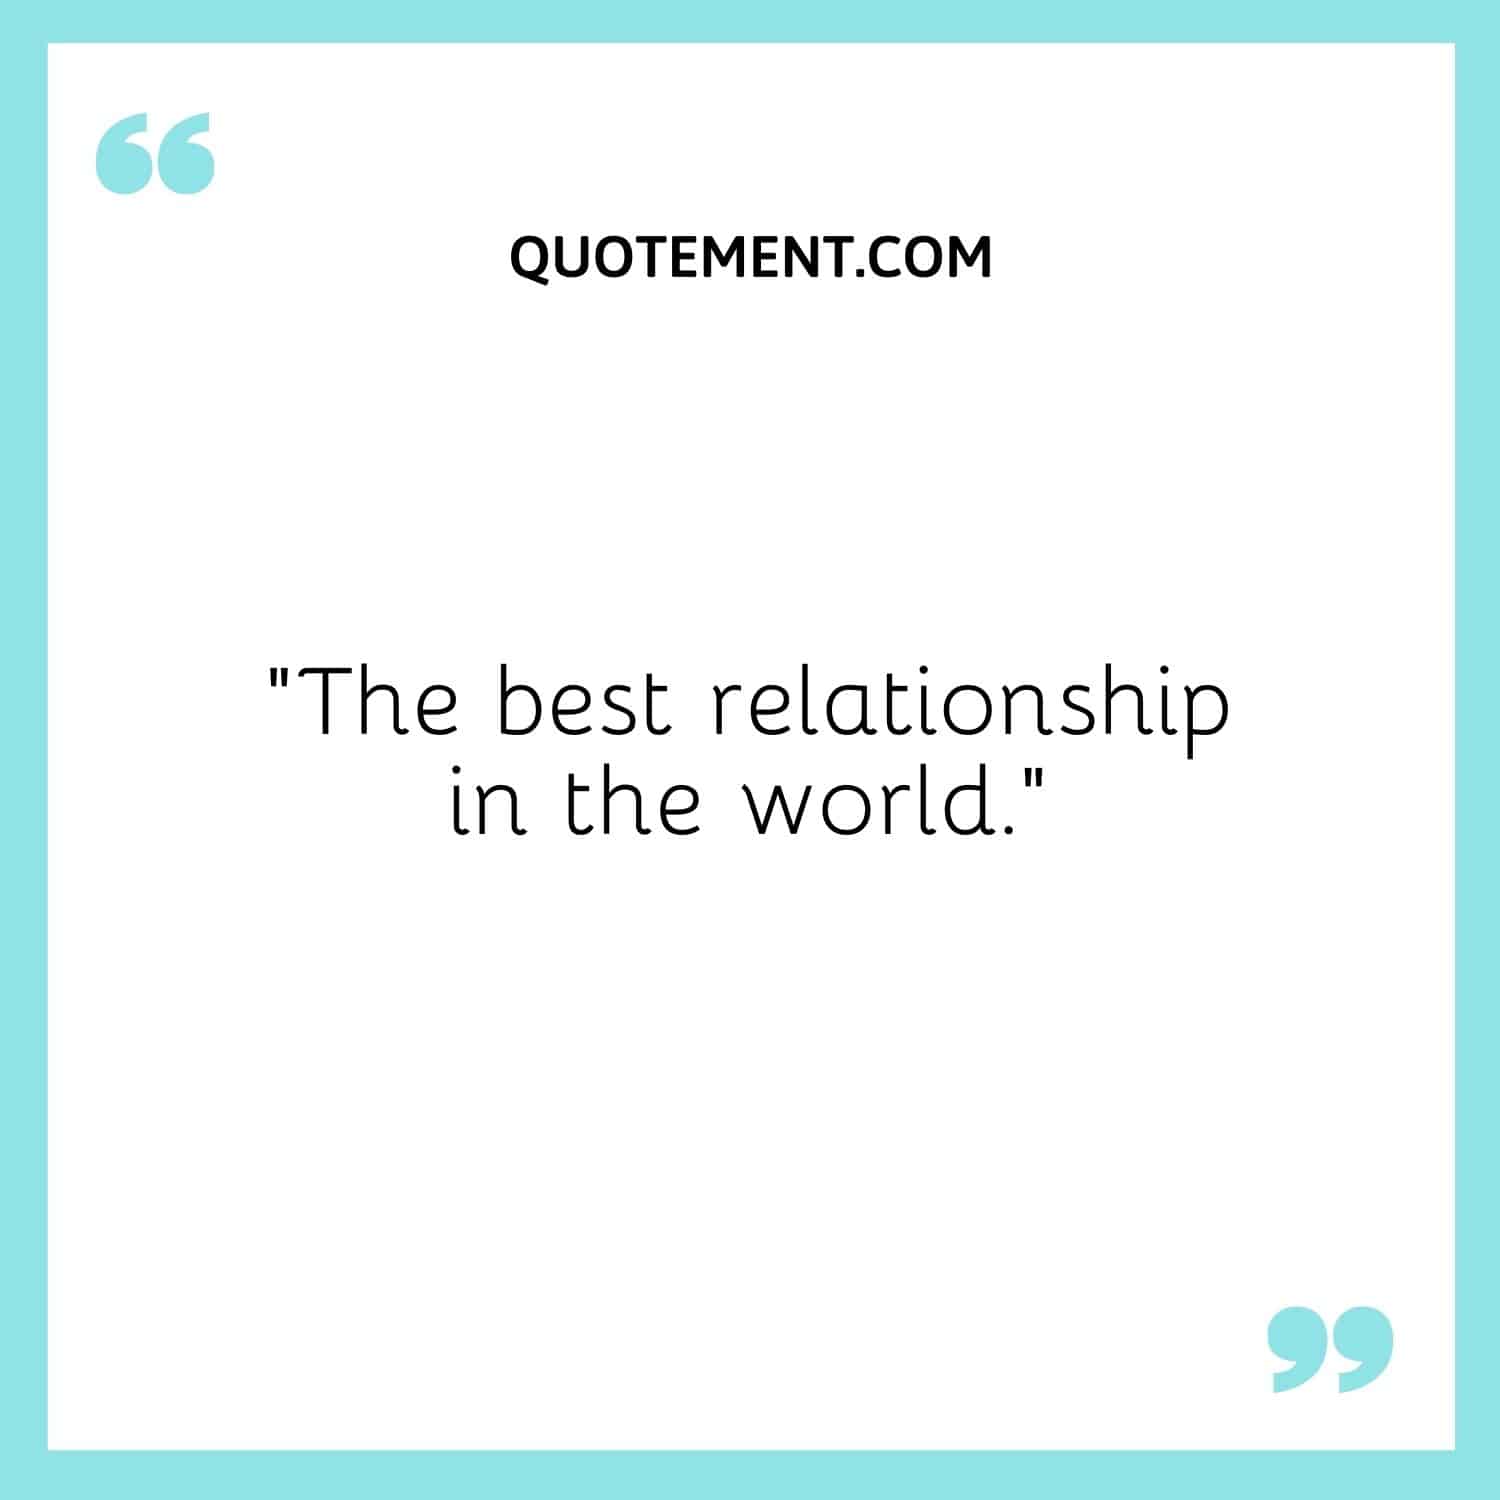 The best relationship in the world.